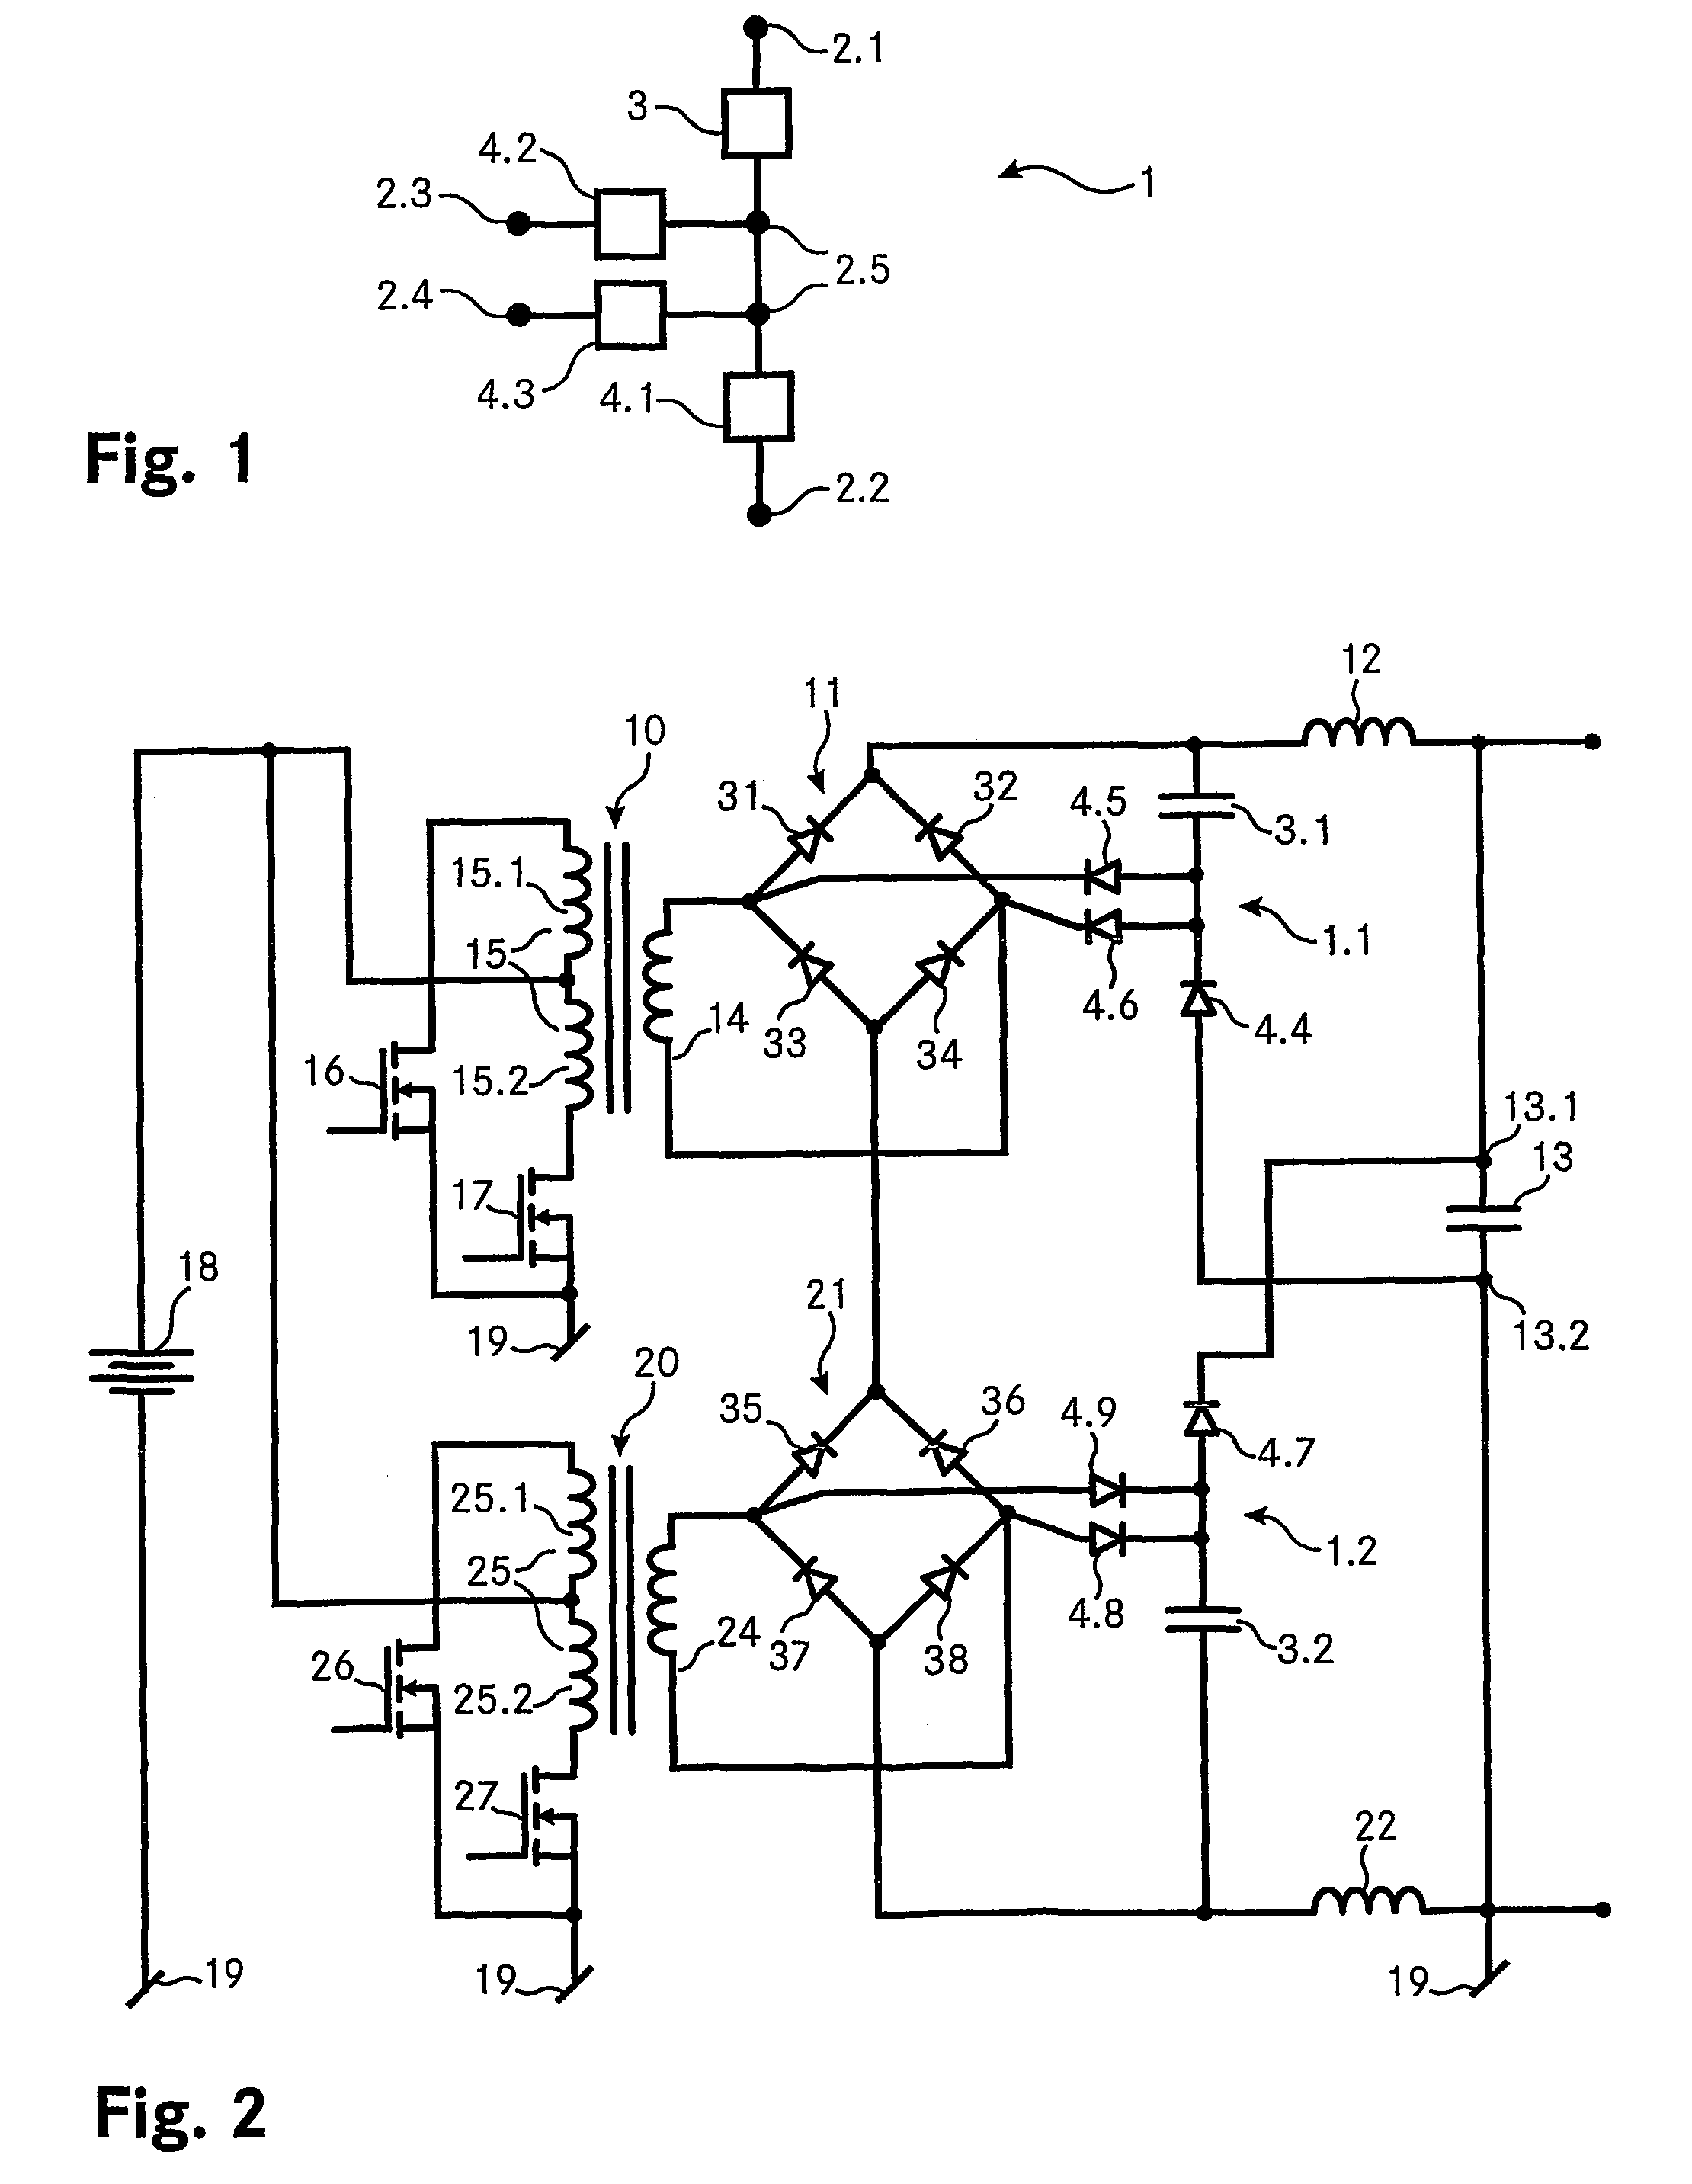 Switching power supply with a snubber circuit